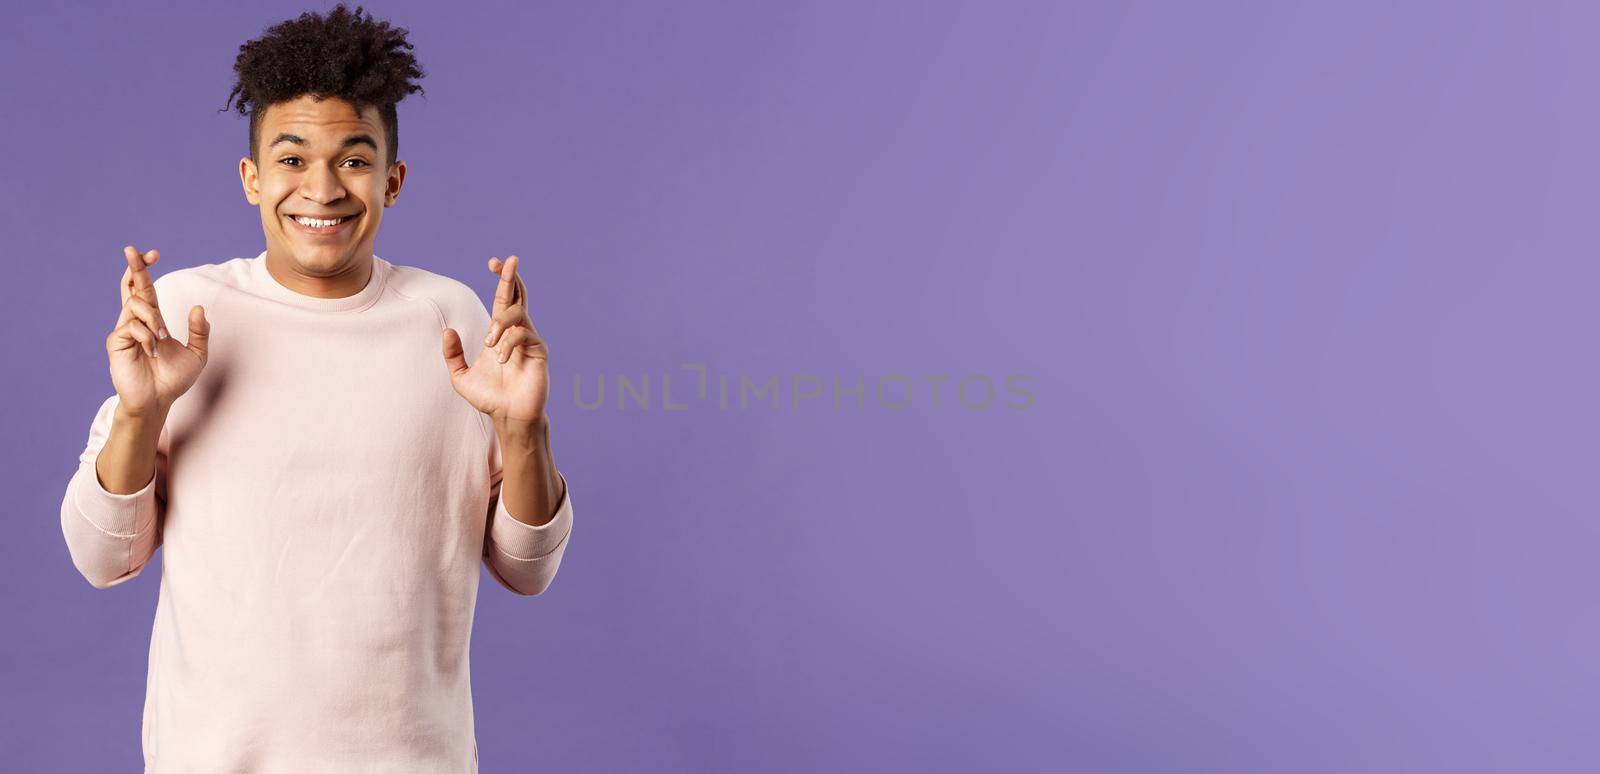 Portrait of hopeful positive, smiling young man having faith in dreams may come true, make wish, cross fingers good luck and awaiting for miracle, standing purple background praying.